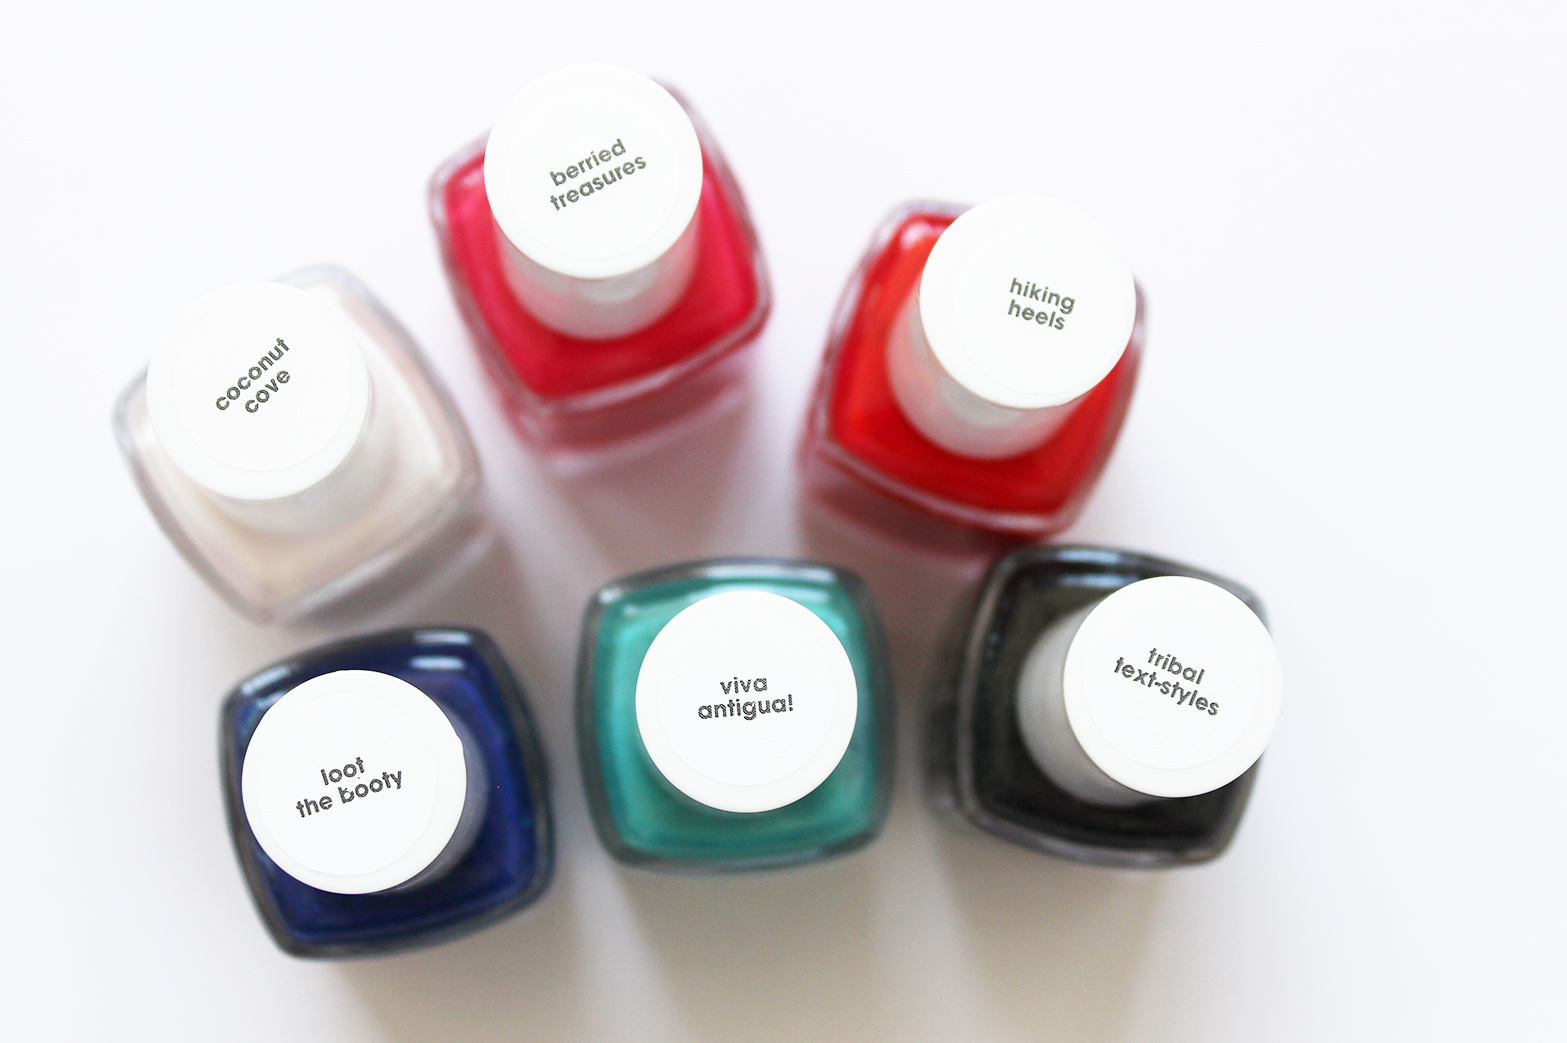 ESSIE | Summer Nail Polish Collection - Review + Swatches - CassandraMyee